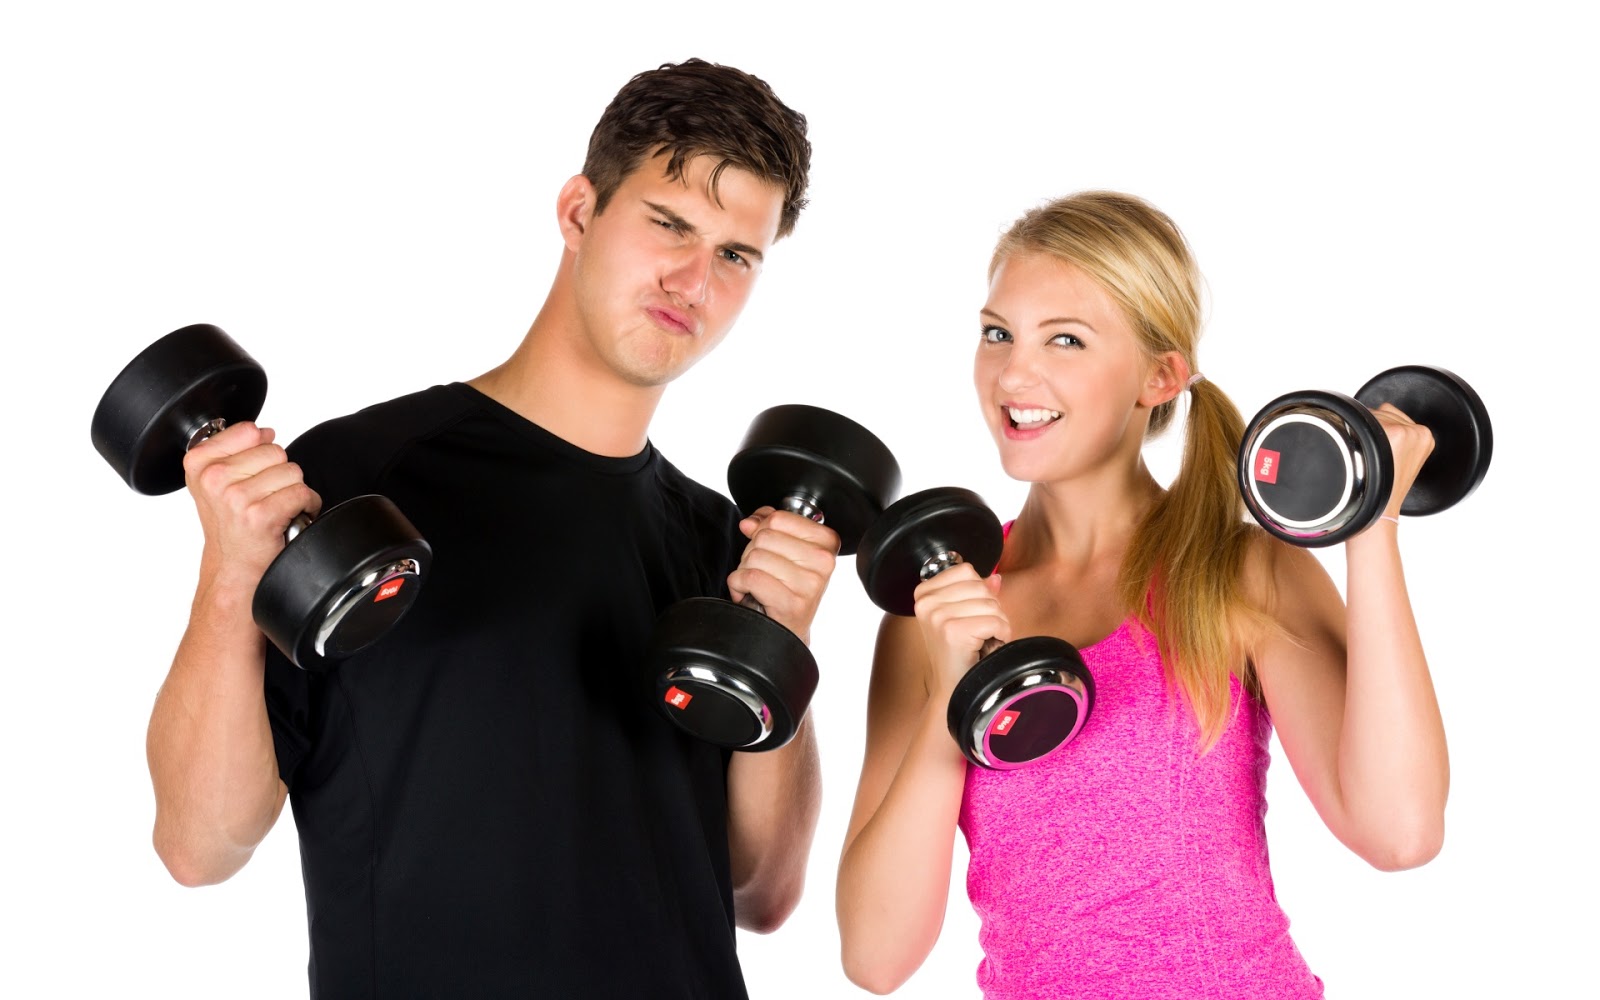 Married Couples lifting dumbbells together